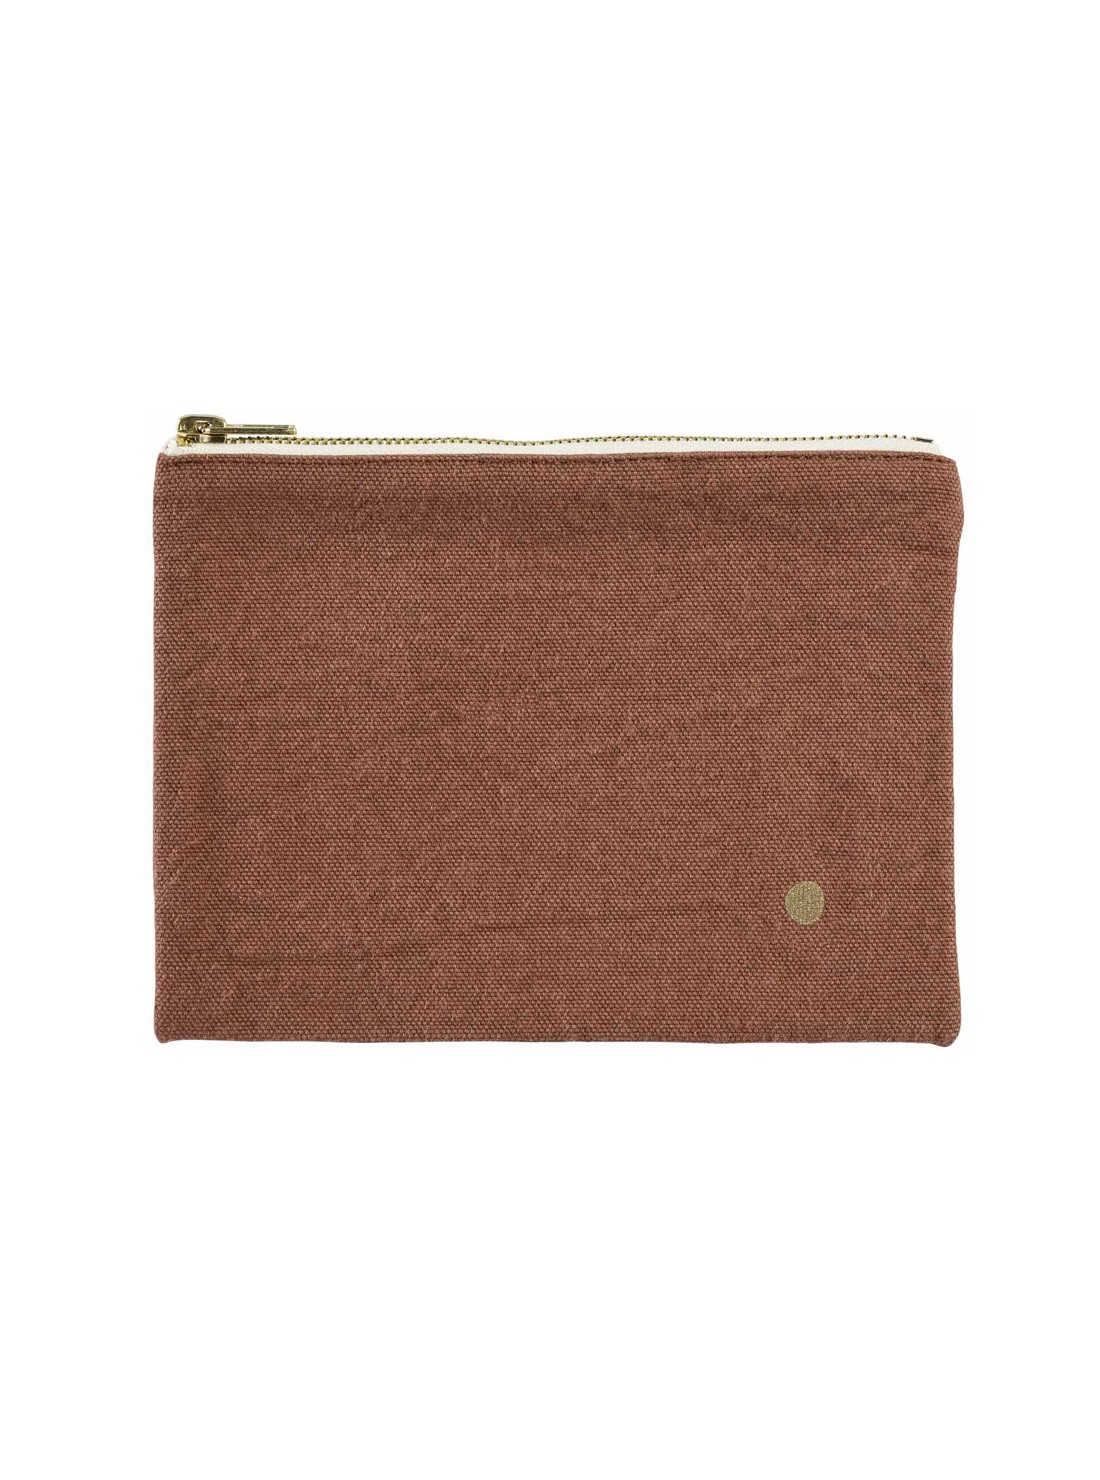 POUCH IONA M